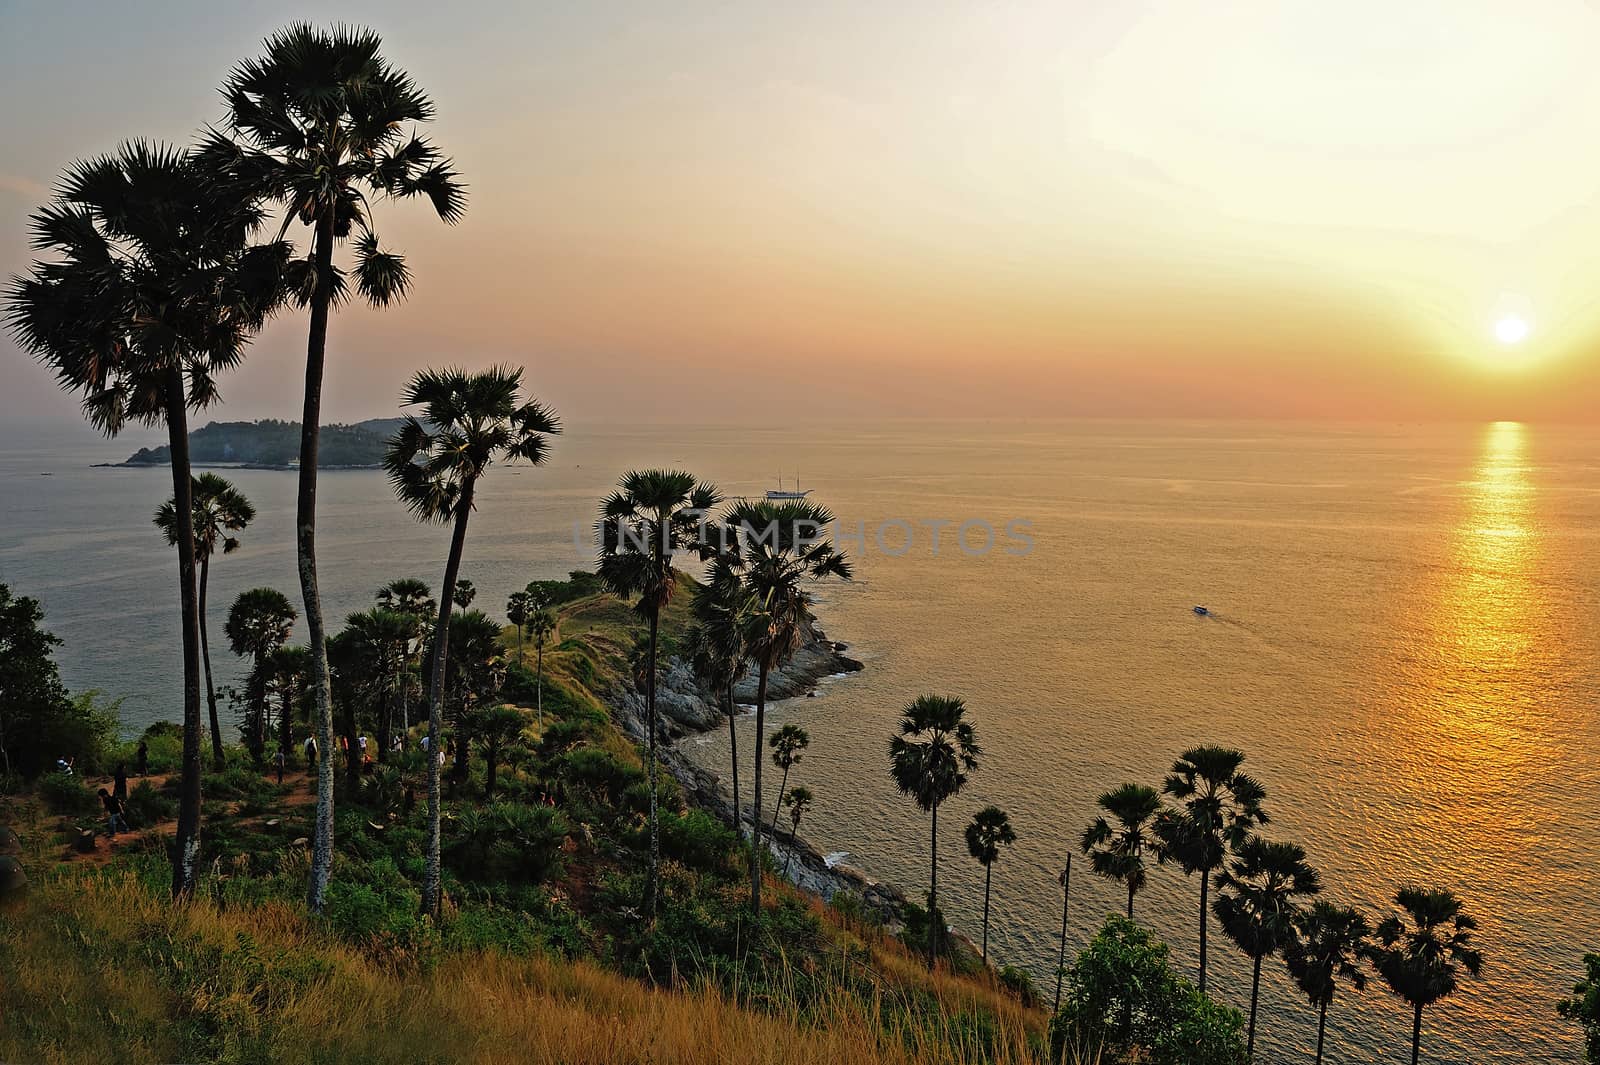 View of a Promthep cape. Phuket island, Thailand by think4photop